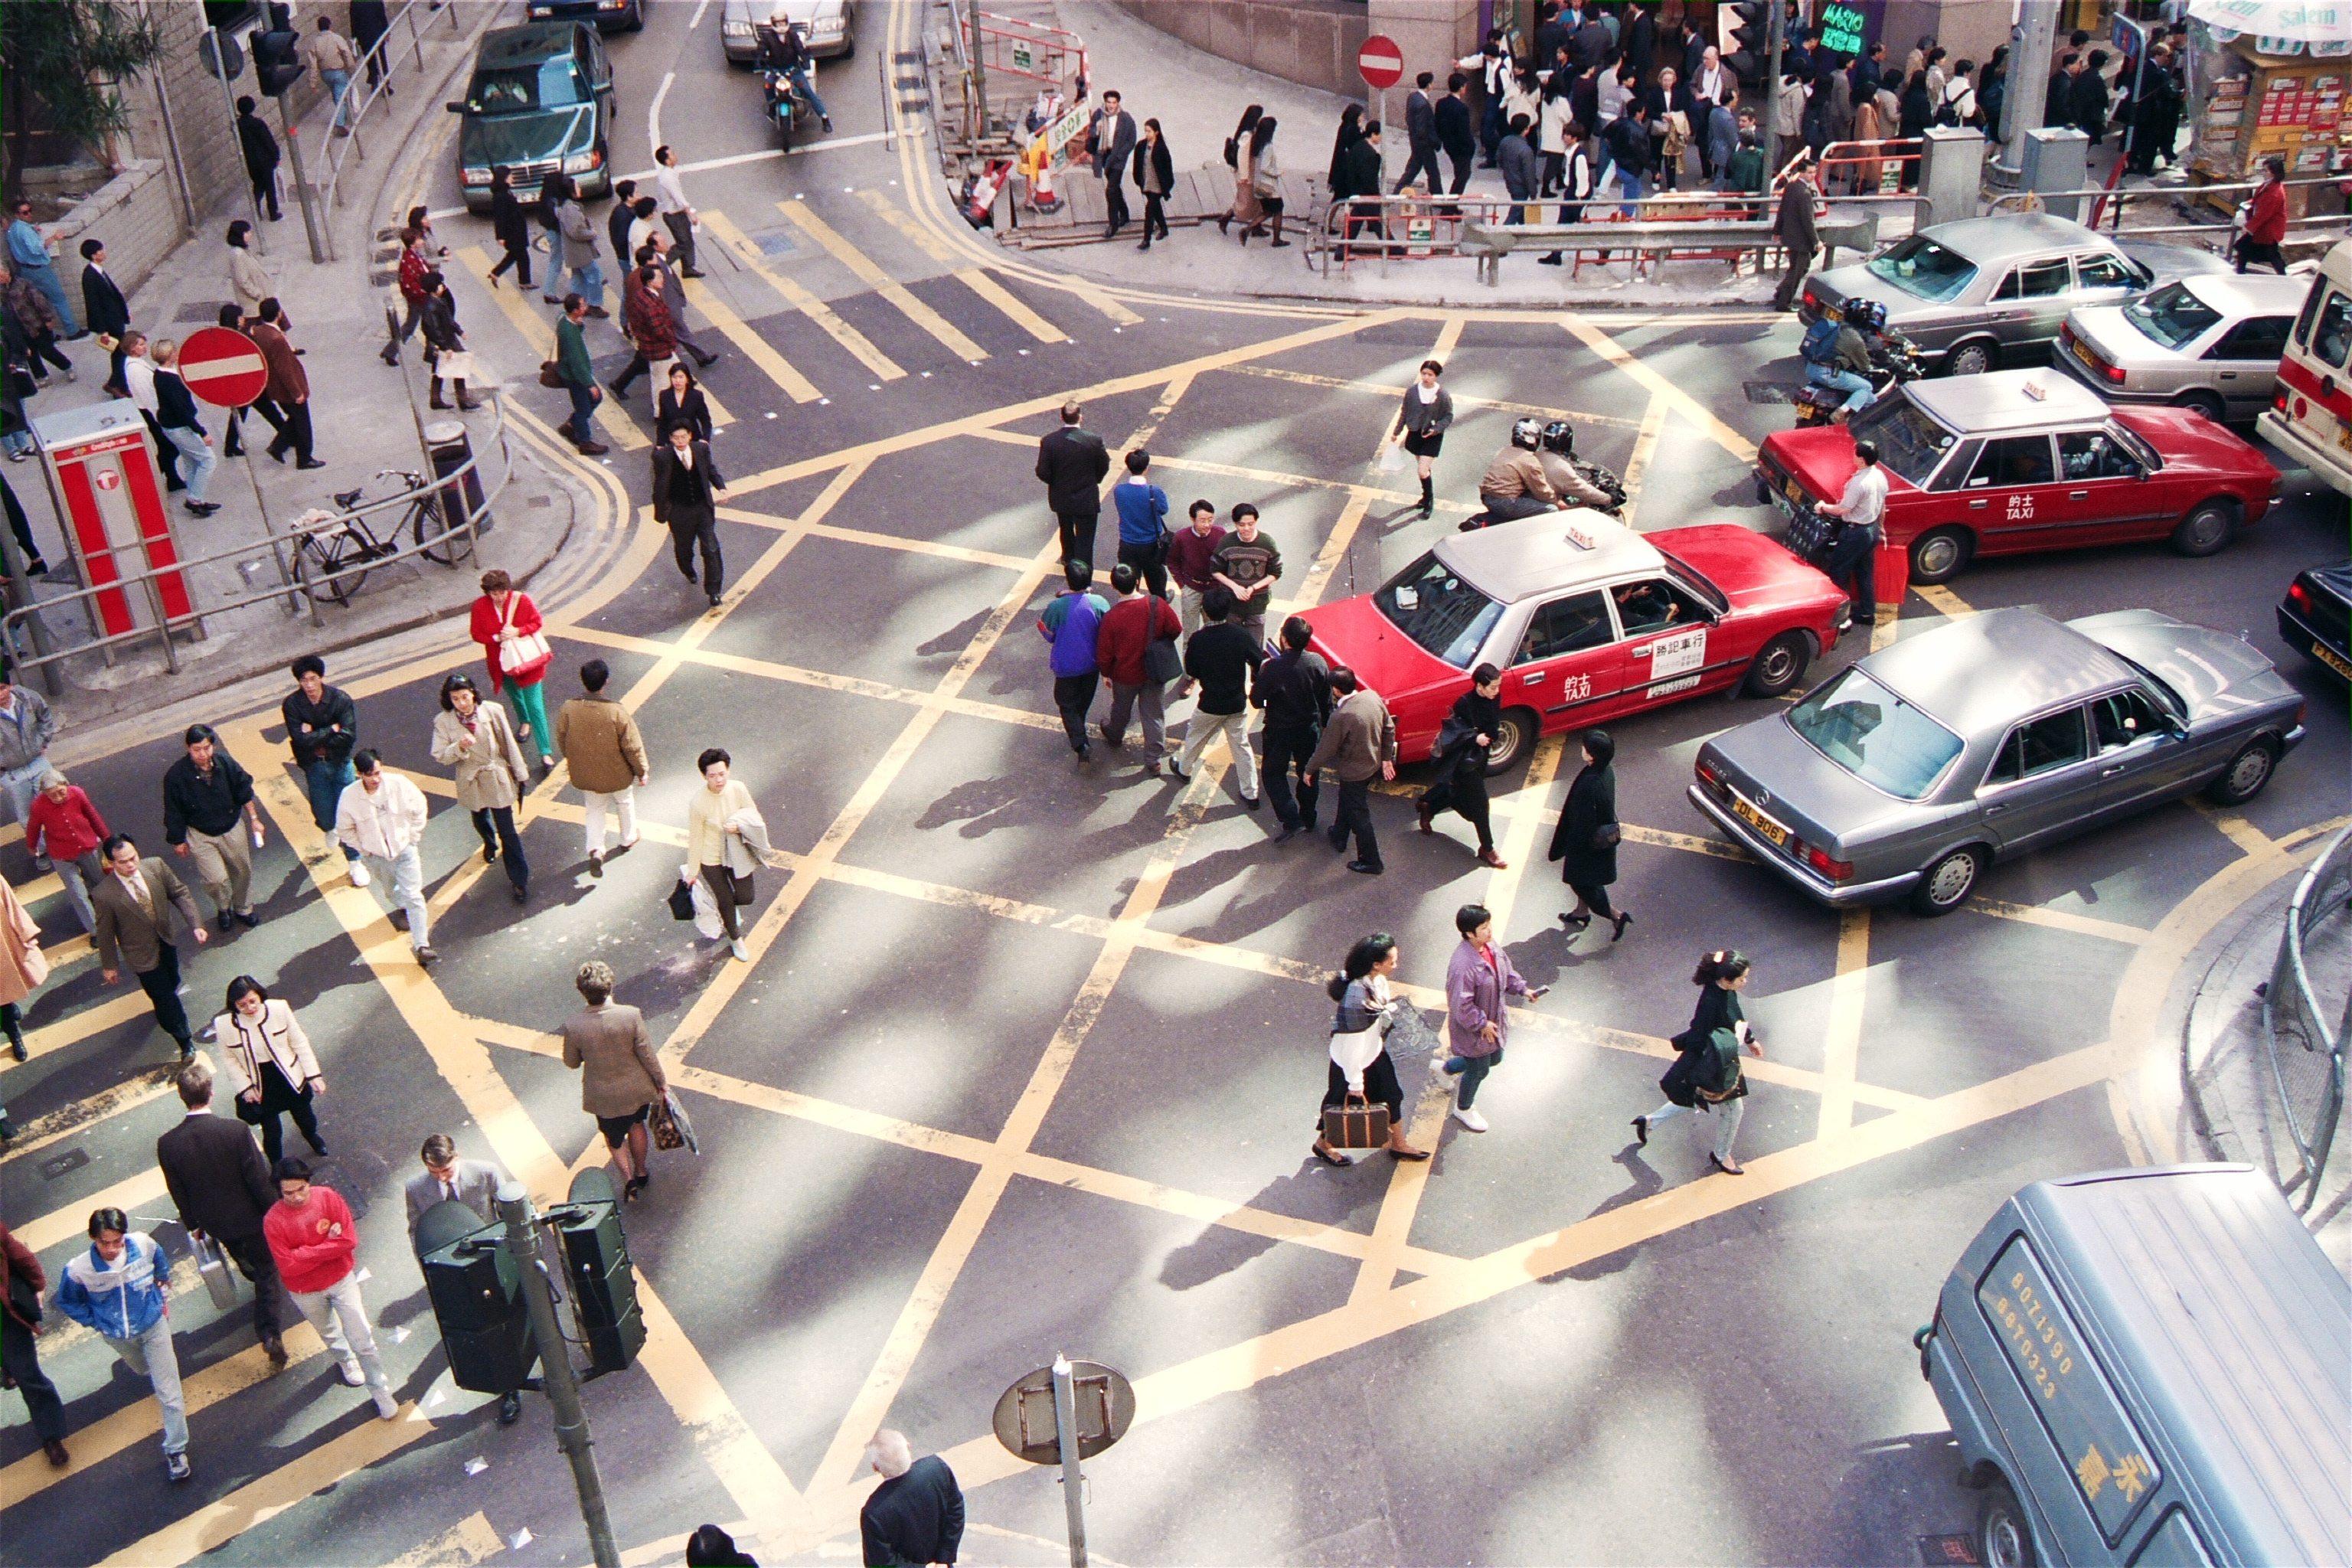 The junction of Queen’s Road Central and Ice House Street in Central, Hong Kong. Though Hong Kong’s oldest street, Queen’s Road remains one of its most important, linking several of the busiest commercial areas of Hong Kong Island. Photo: SCMP